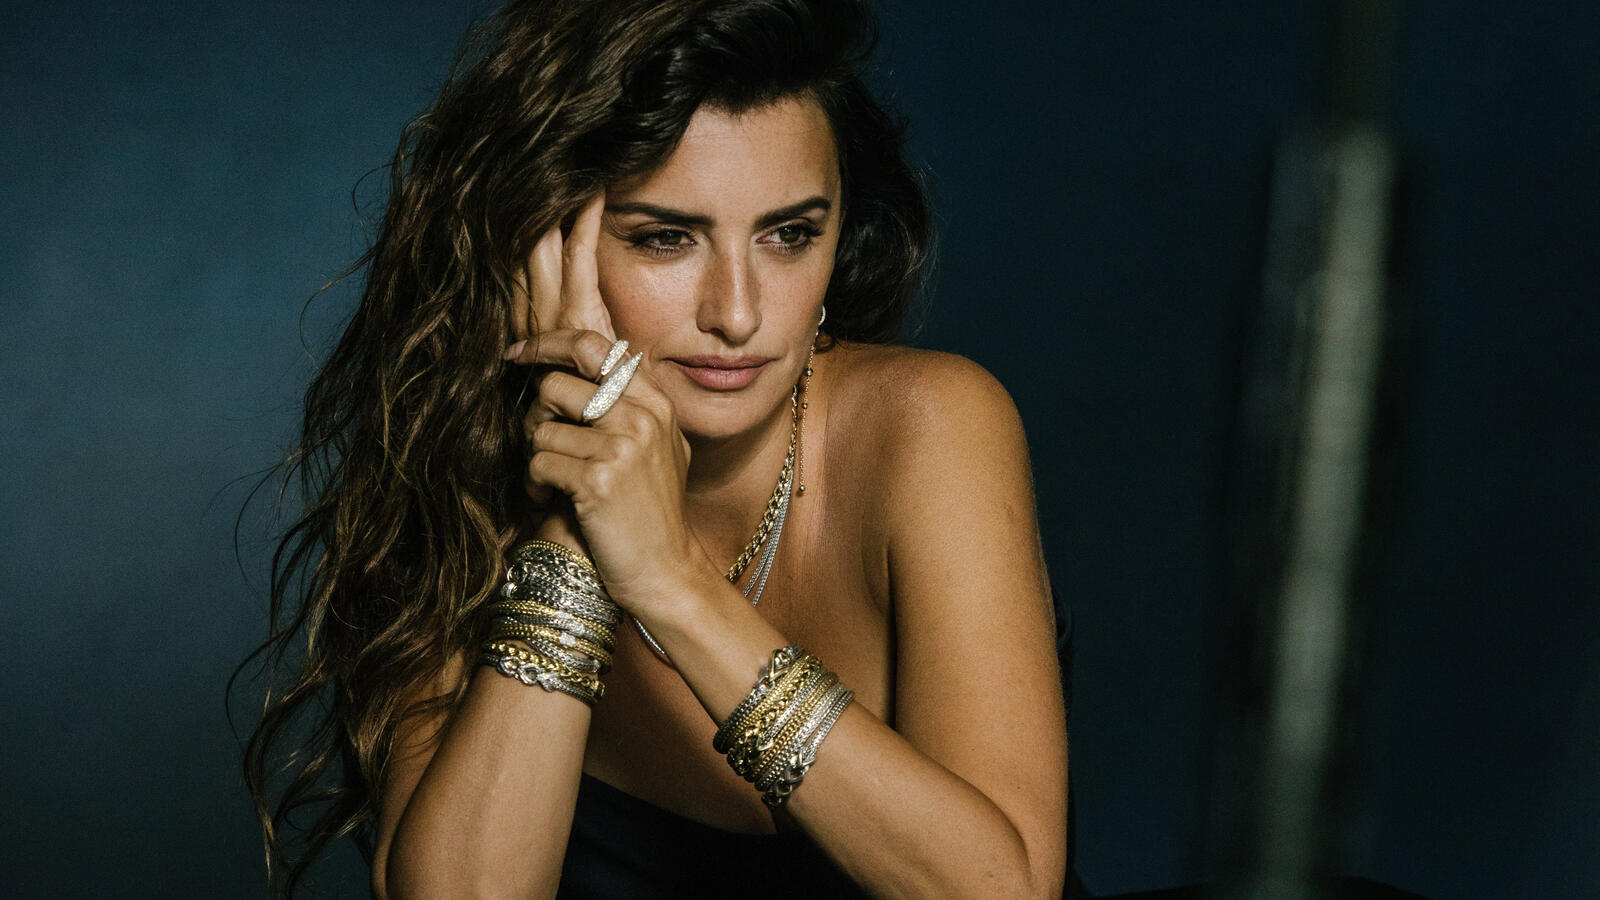 Free photo Beautiful pictures of Penelope Cruz, celebrities, girls for free